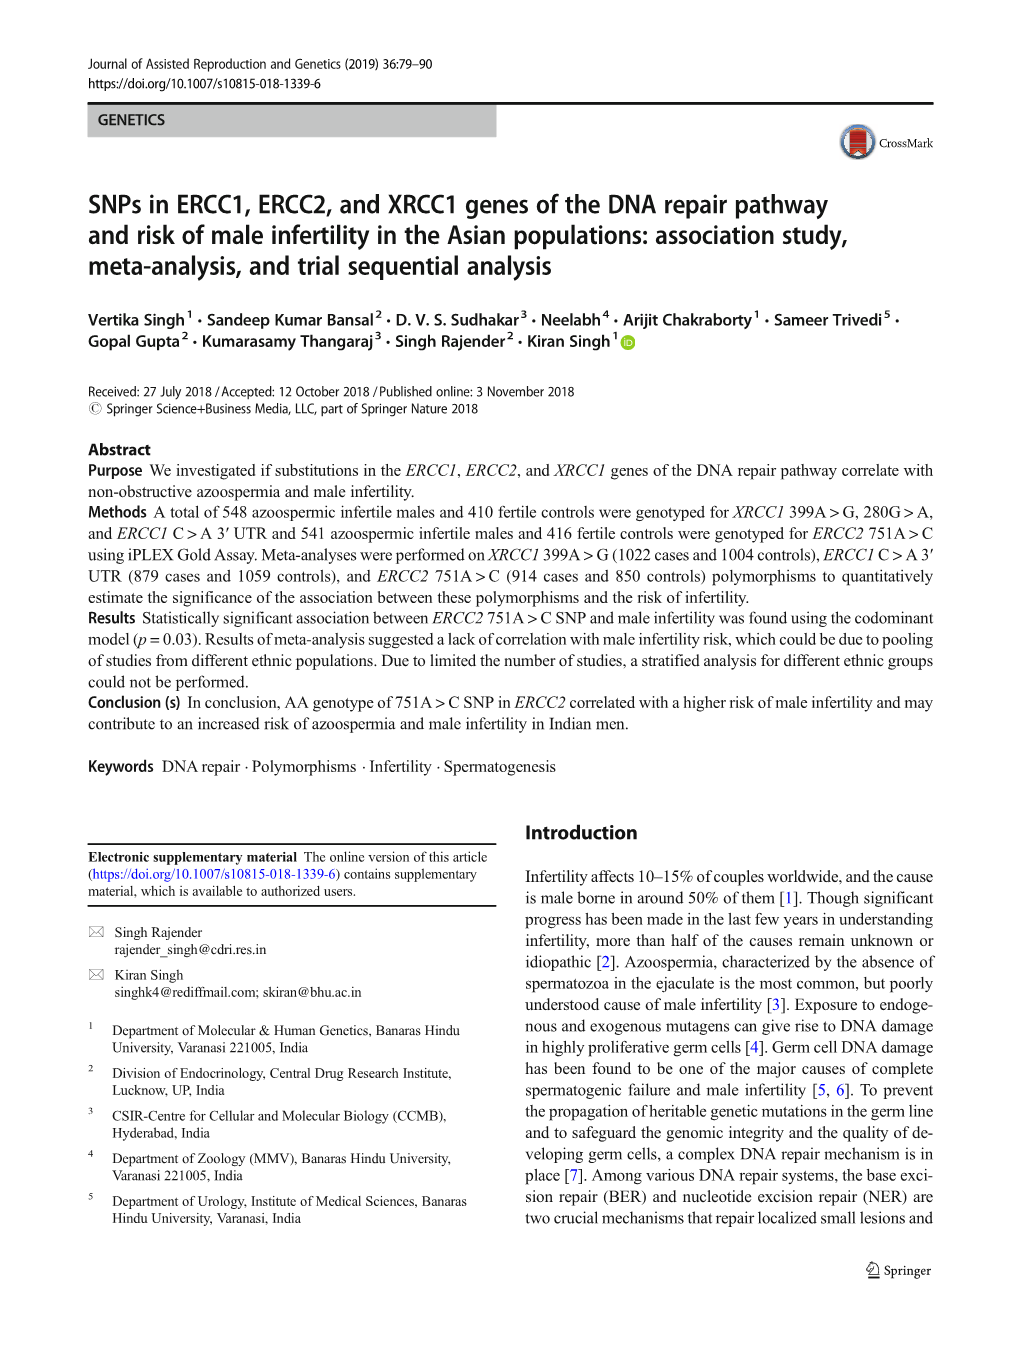 Snps in ERCC1, ERCC2, and XRCC1 Genes of the DNA Repair Pathway